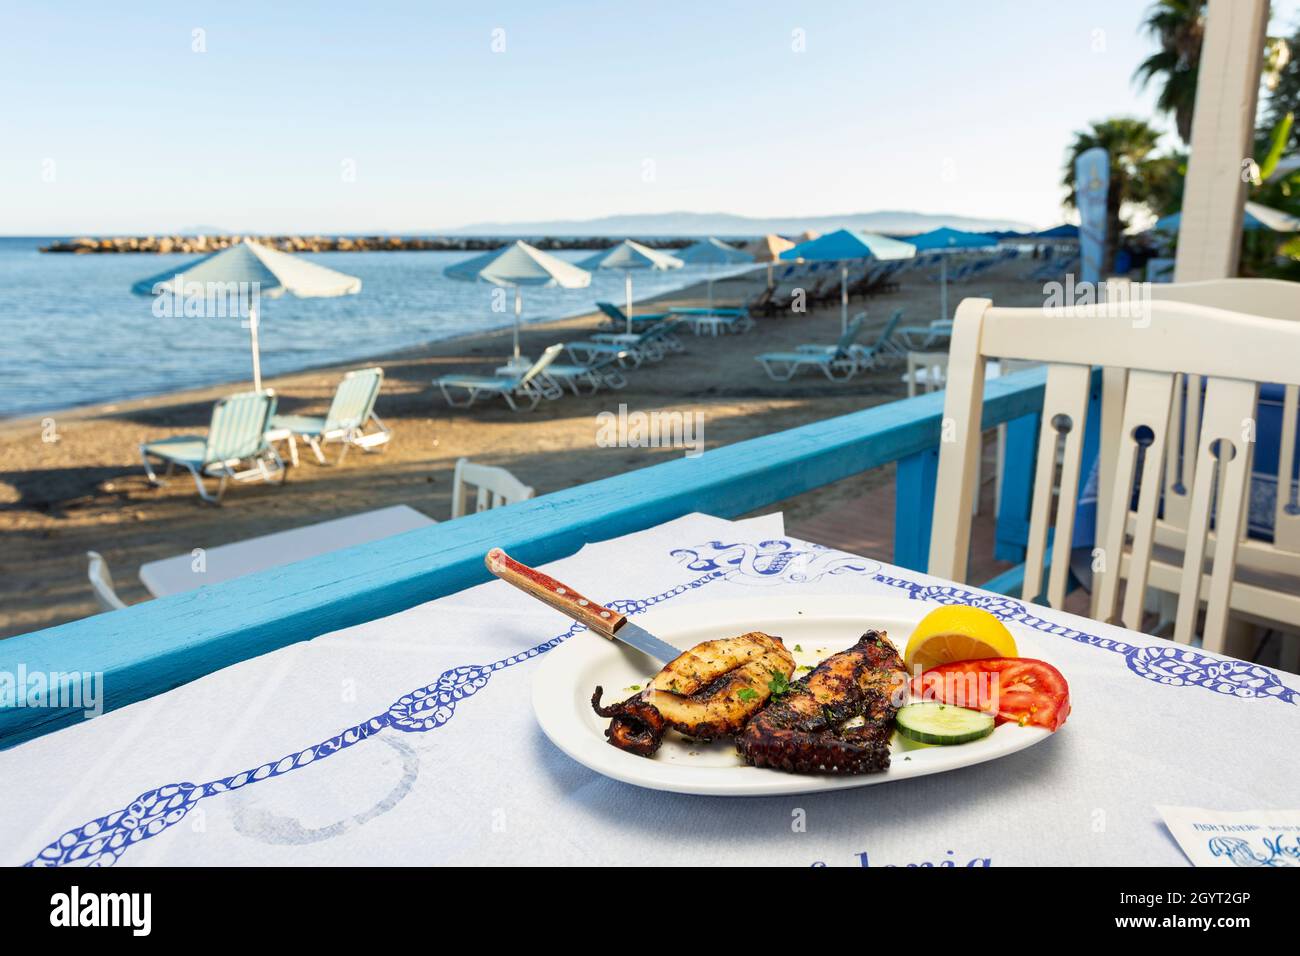 A dish of grilled octopus on the table of a waterfront taverna in Katelios, Kefalonia, Ioanian Islands, Greece Stock Photo